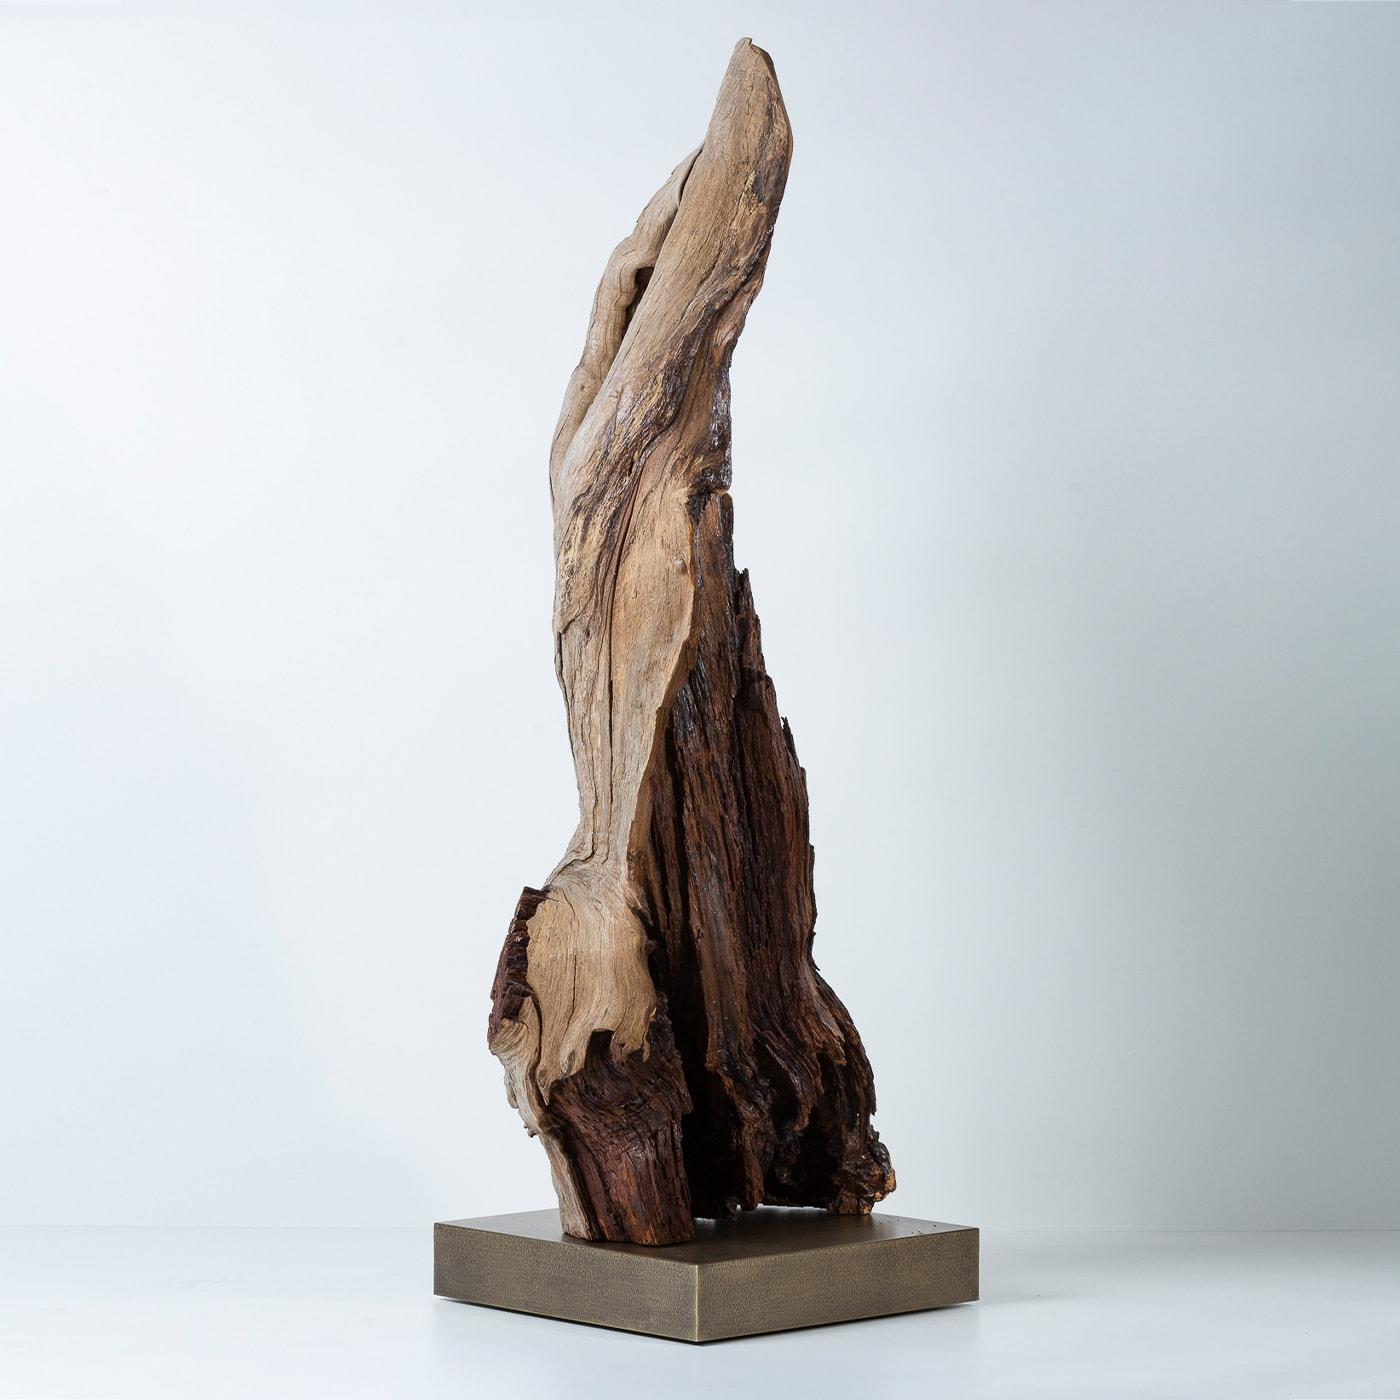 Crafted out of a single piece of weathered chestnut, this intriguing sculpture will be an intriguing focal point in sophisticated rustic-chic decors. The unpredictable yet unique detailing of its silhouette lends it its one-off charm, sealed by the